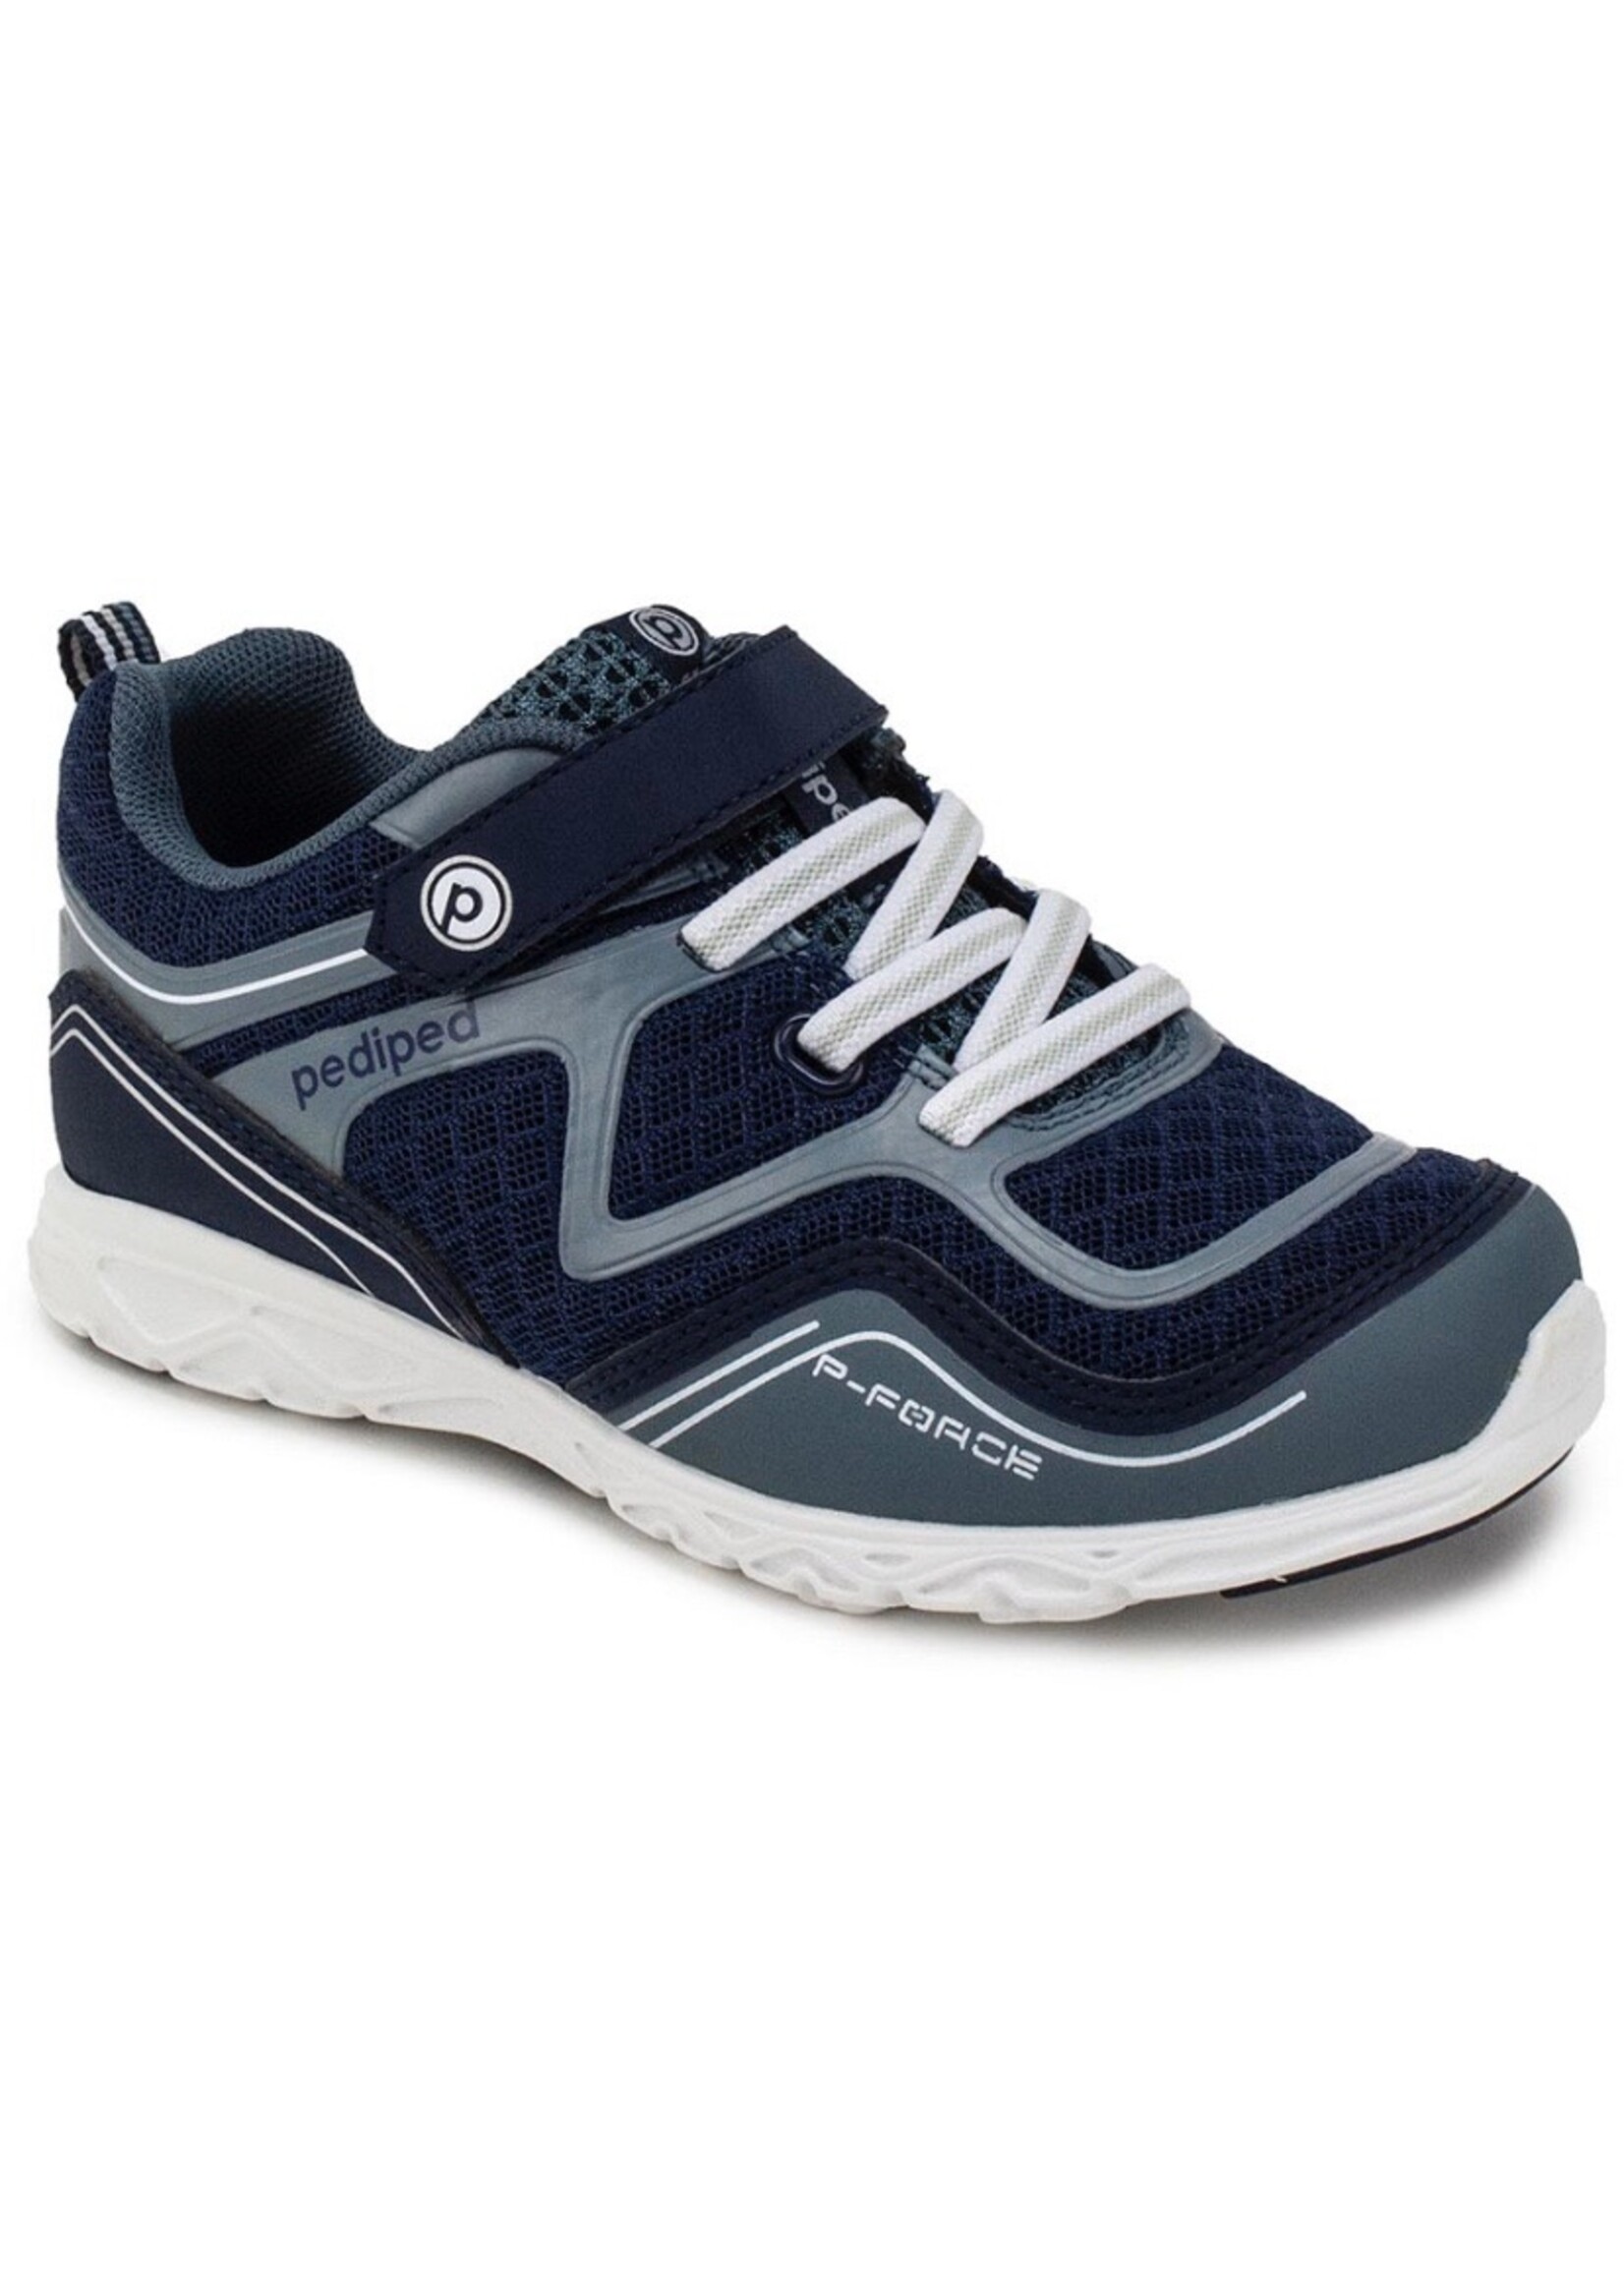 Pediped Pediped Force Navy